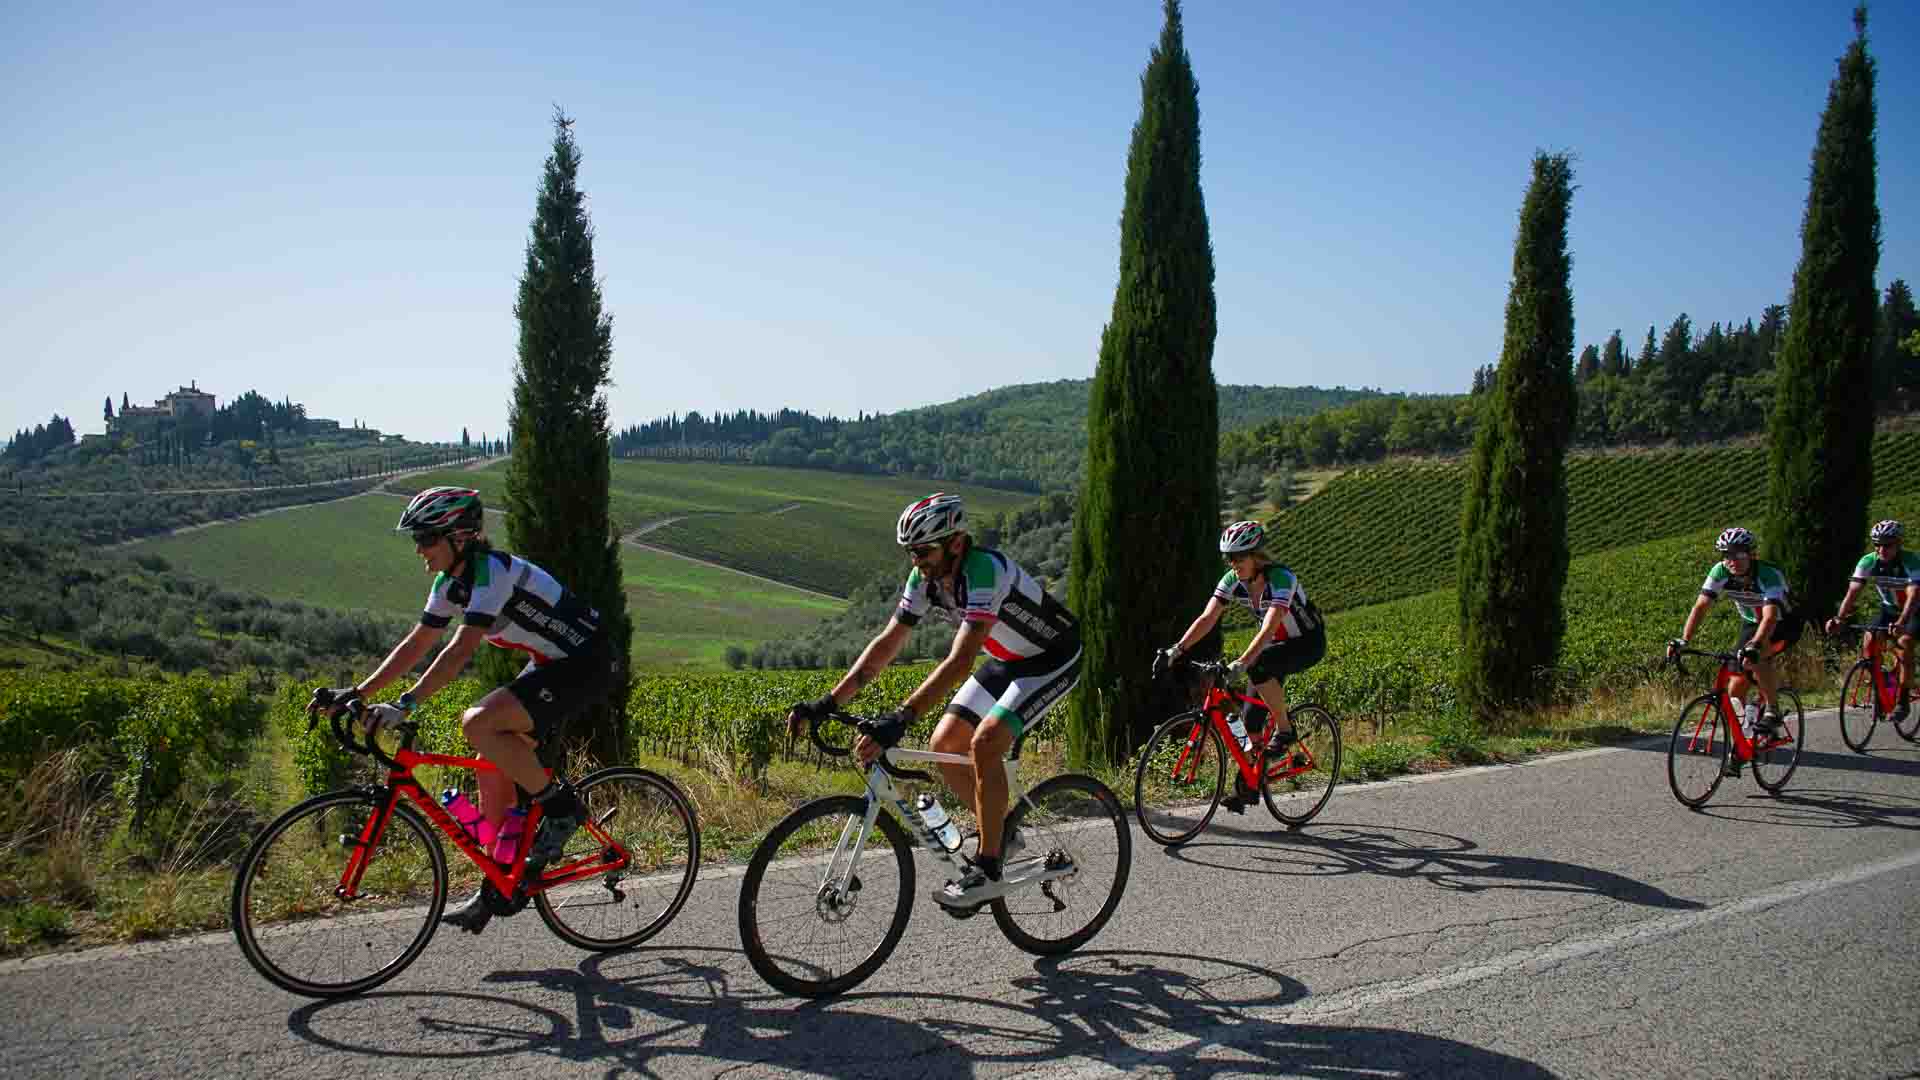 Cyclists on a road cycling holiday in Tuscany by Cypress trees